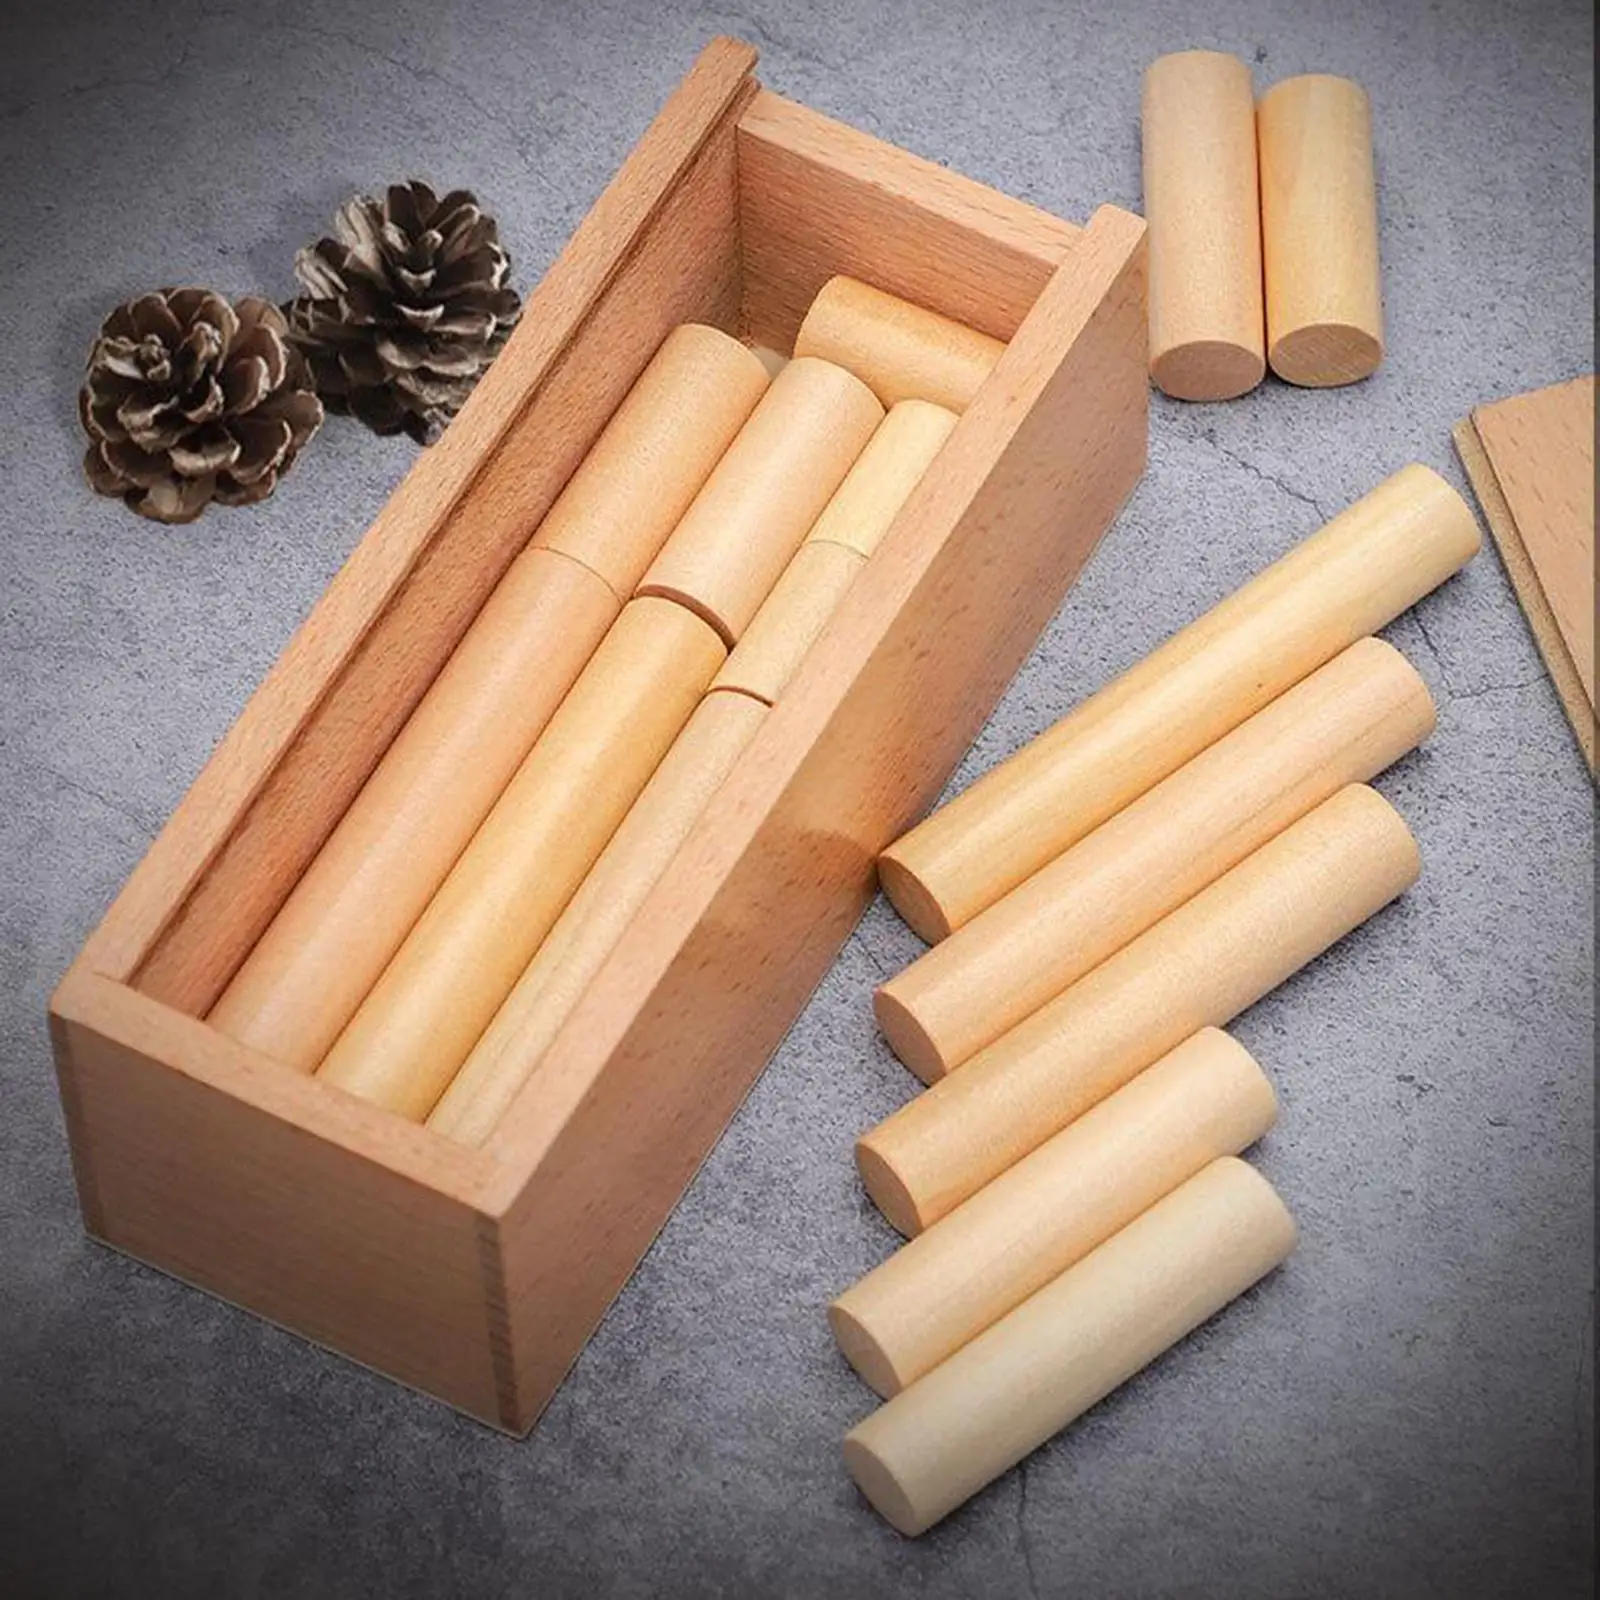 Wooden Cylinder Puzzle Toy Intelligence Brain Development for Kids Adults